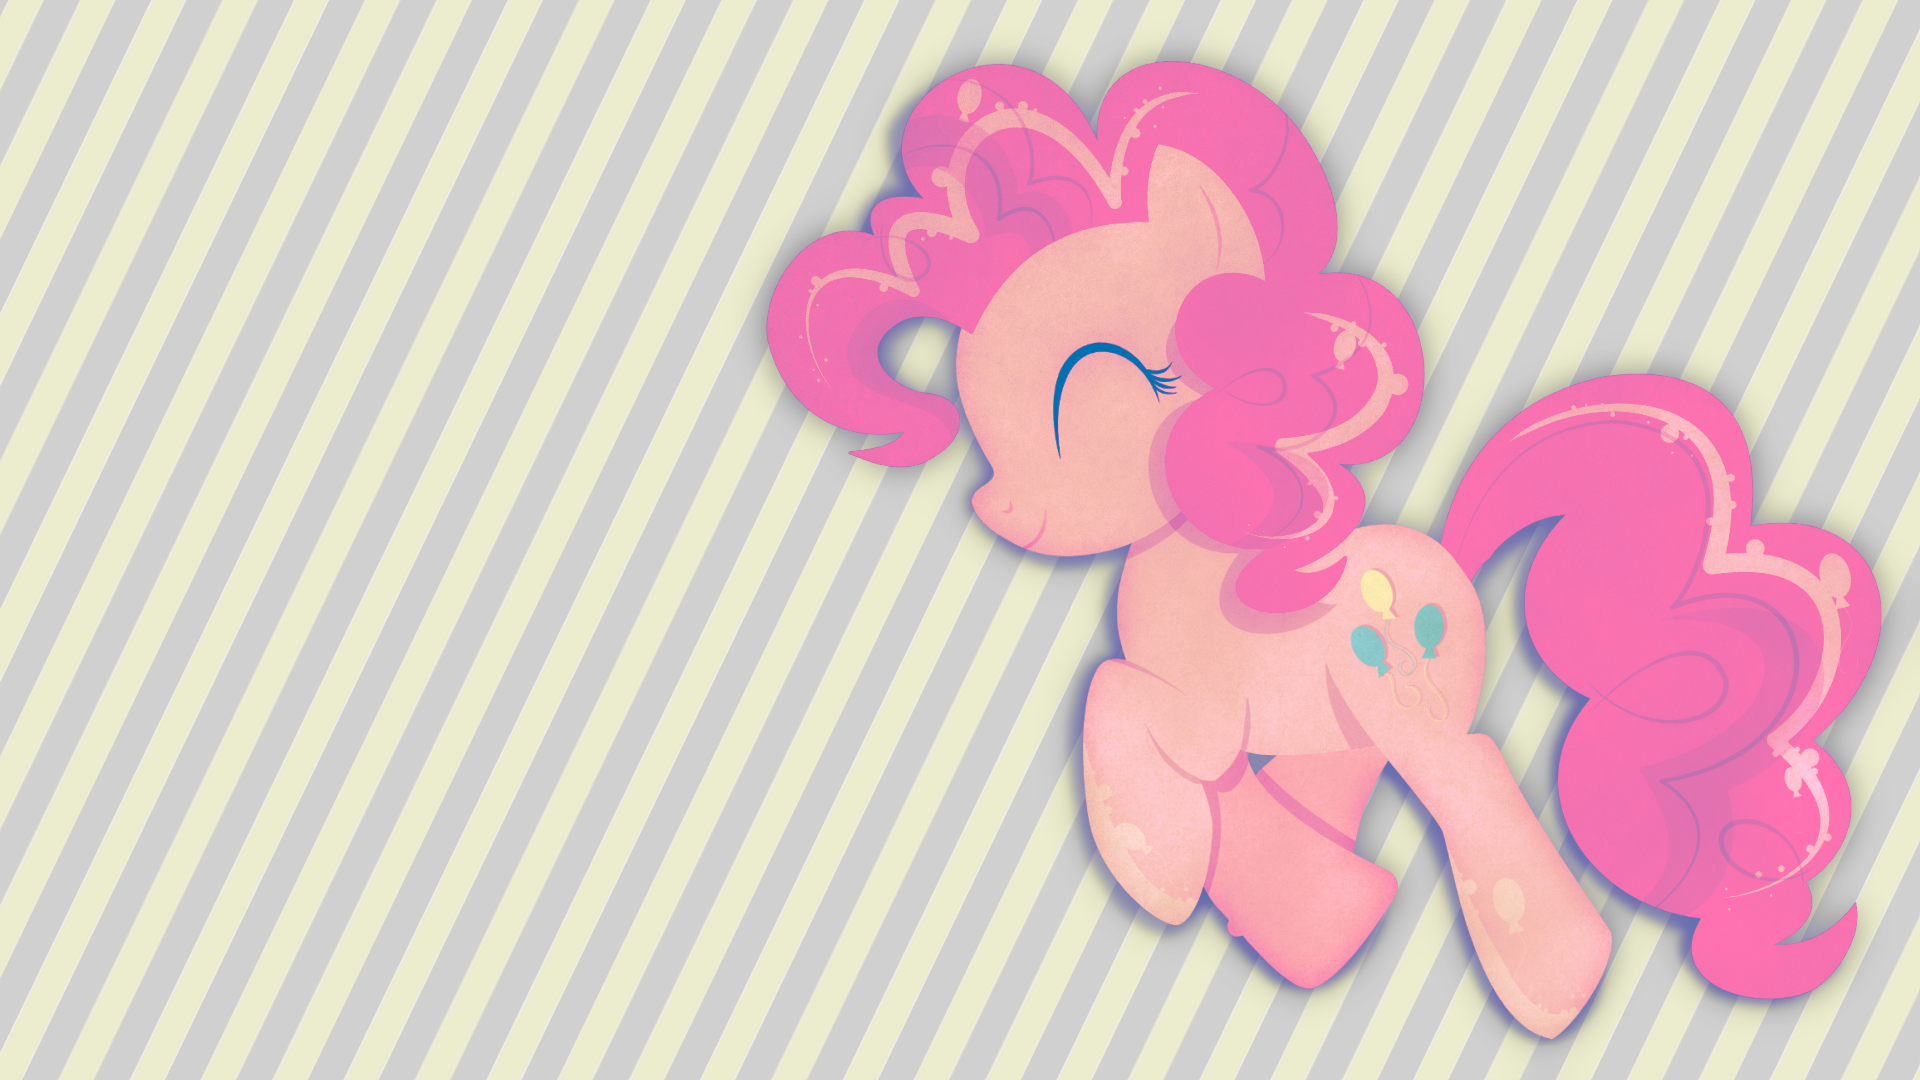 Wallpaper} Pinkie by eipreD and selinmarsou